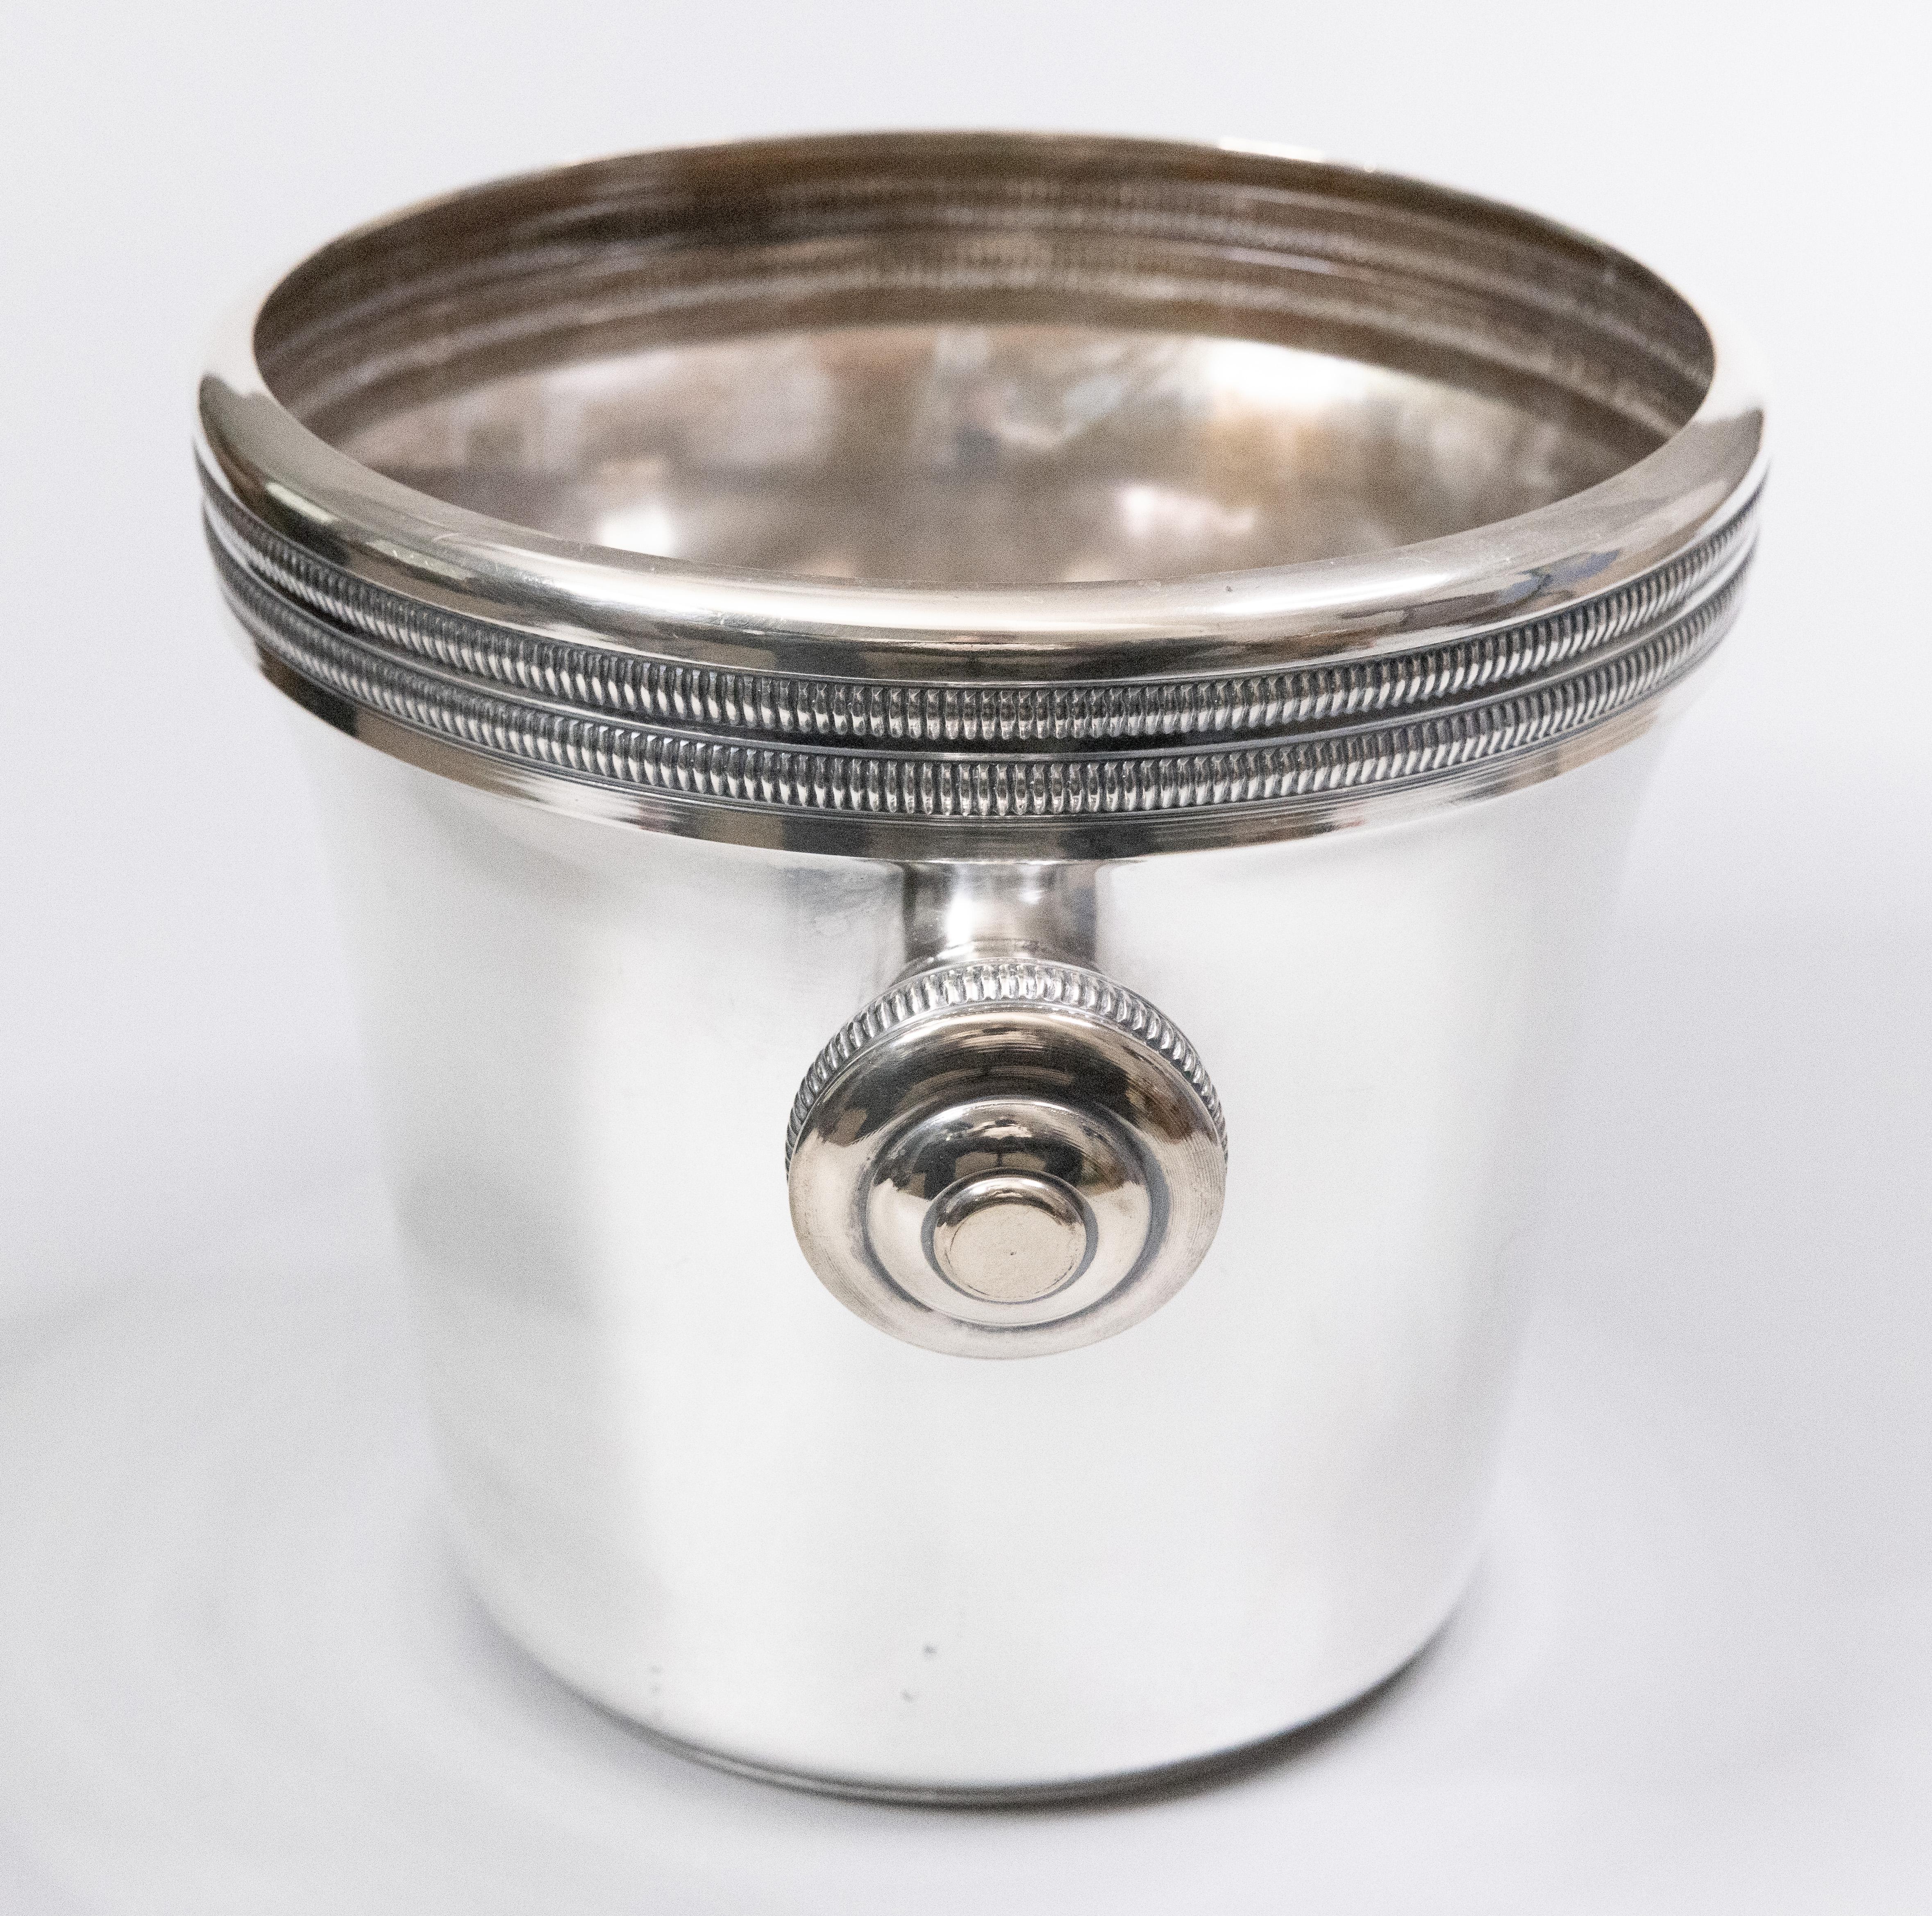 A fabulous early 20th-century French Art Deco silver plated champagne ice bucket or wine cooler with round knob handles and gadrooned trim. Maker's mark on reverse. This fine quality ice bucket is solid and heavy with a sleek design, ideal for the